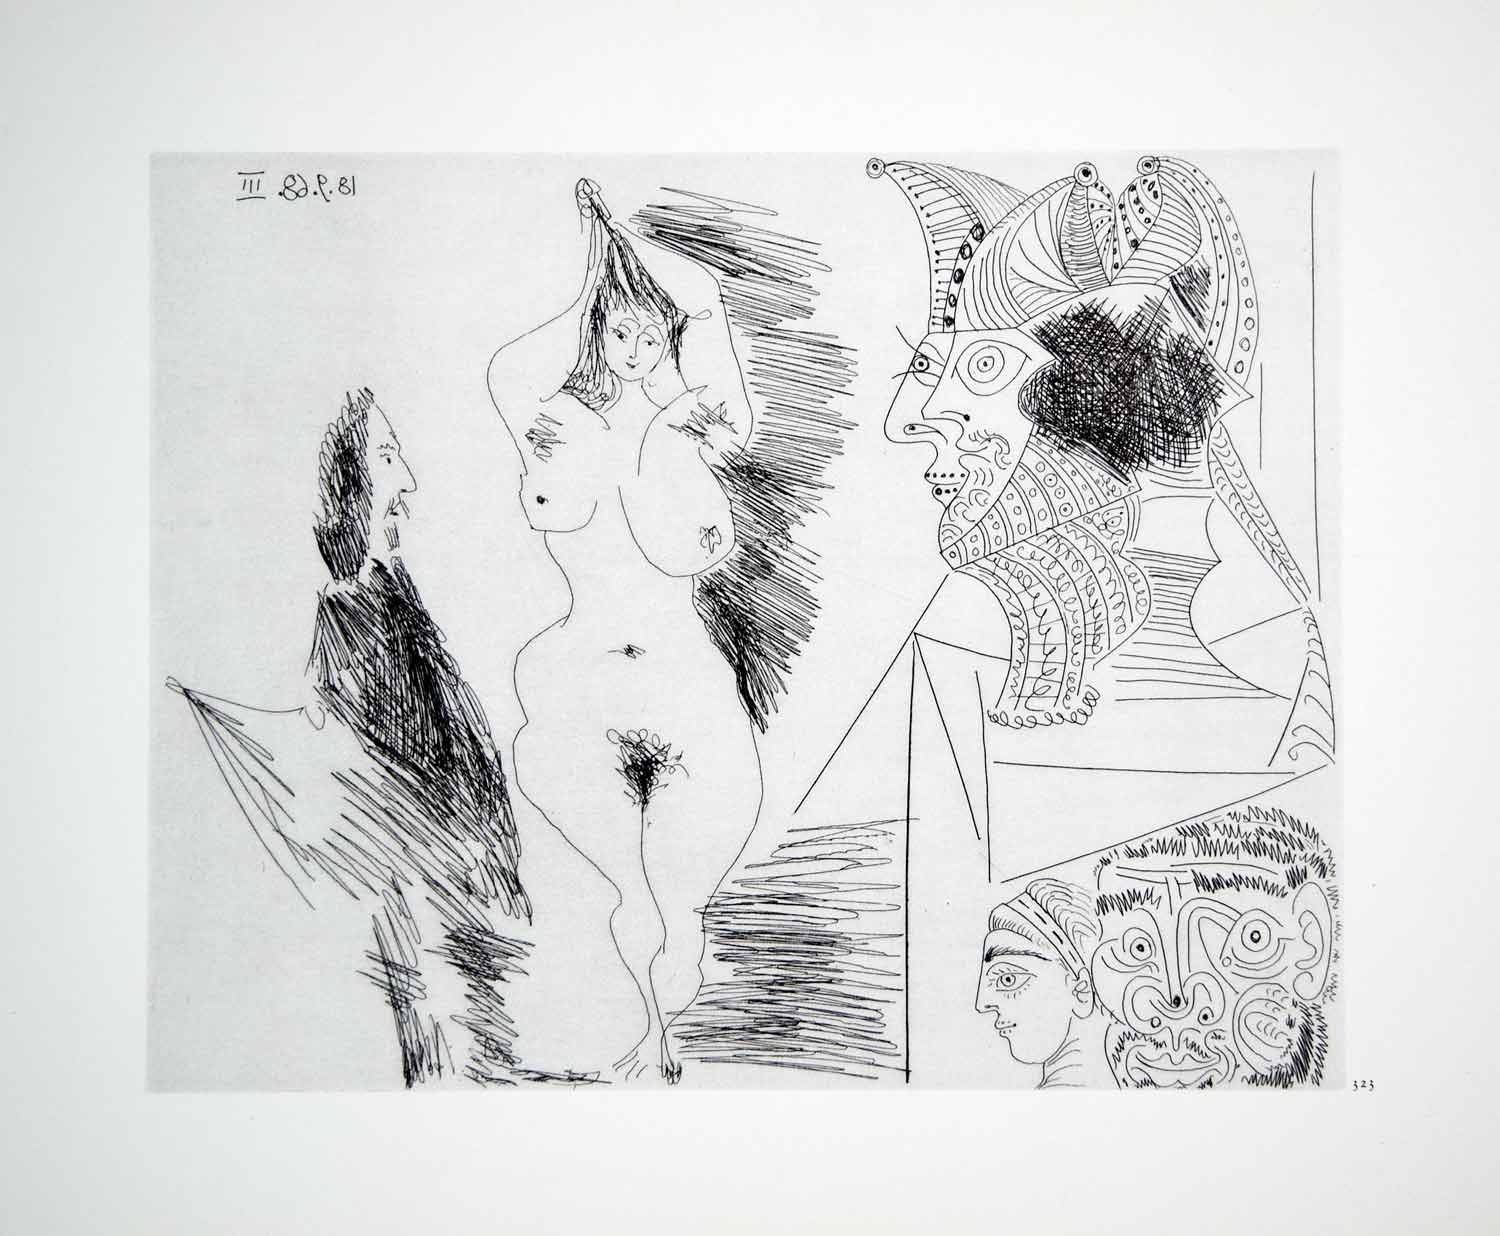 1970 Heliogravure Picasso Nude Standing Female Faces Profile Abstract Art P347B